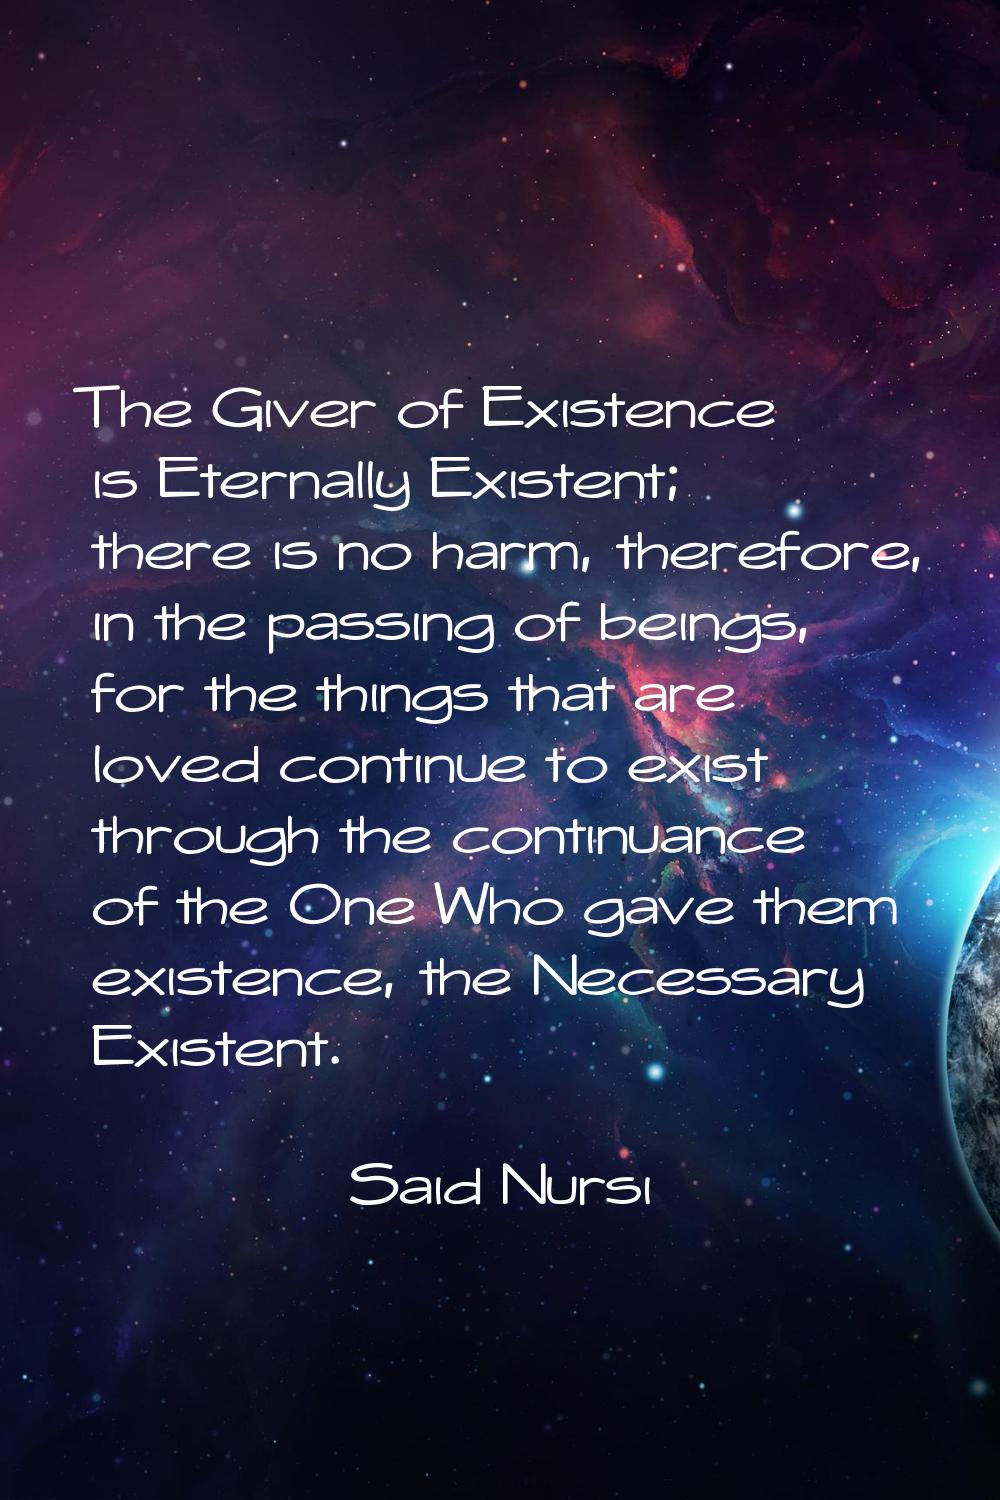 The Giver of Existence is Eternally Existent; there is no harm, therefore, in the passing of beings